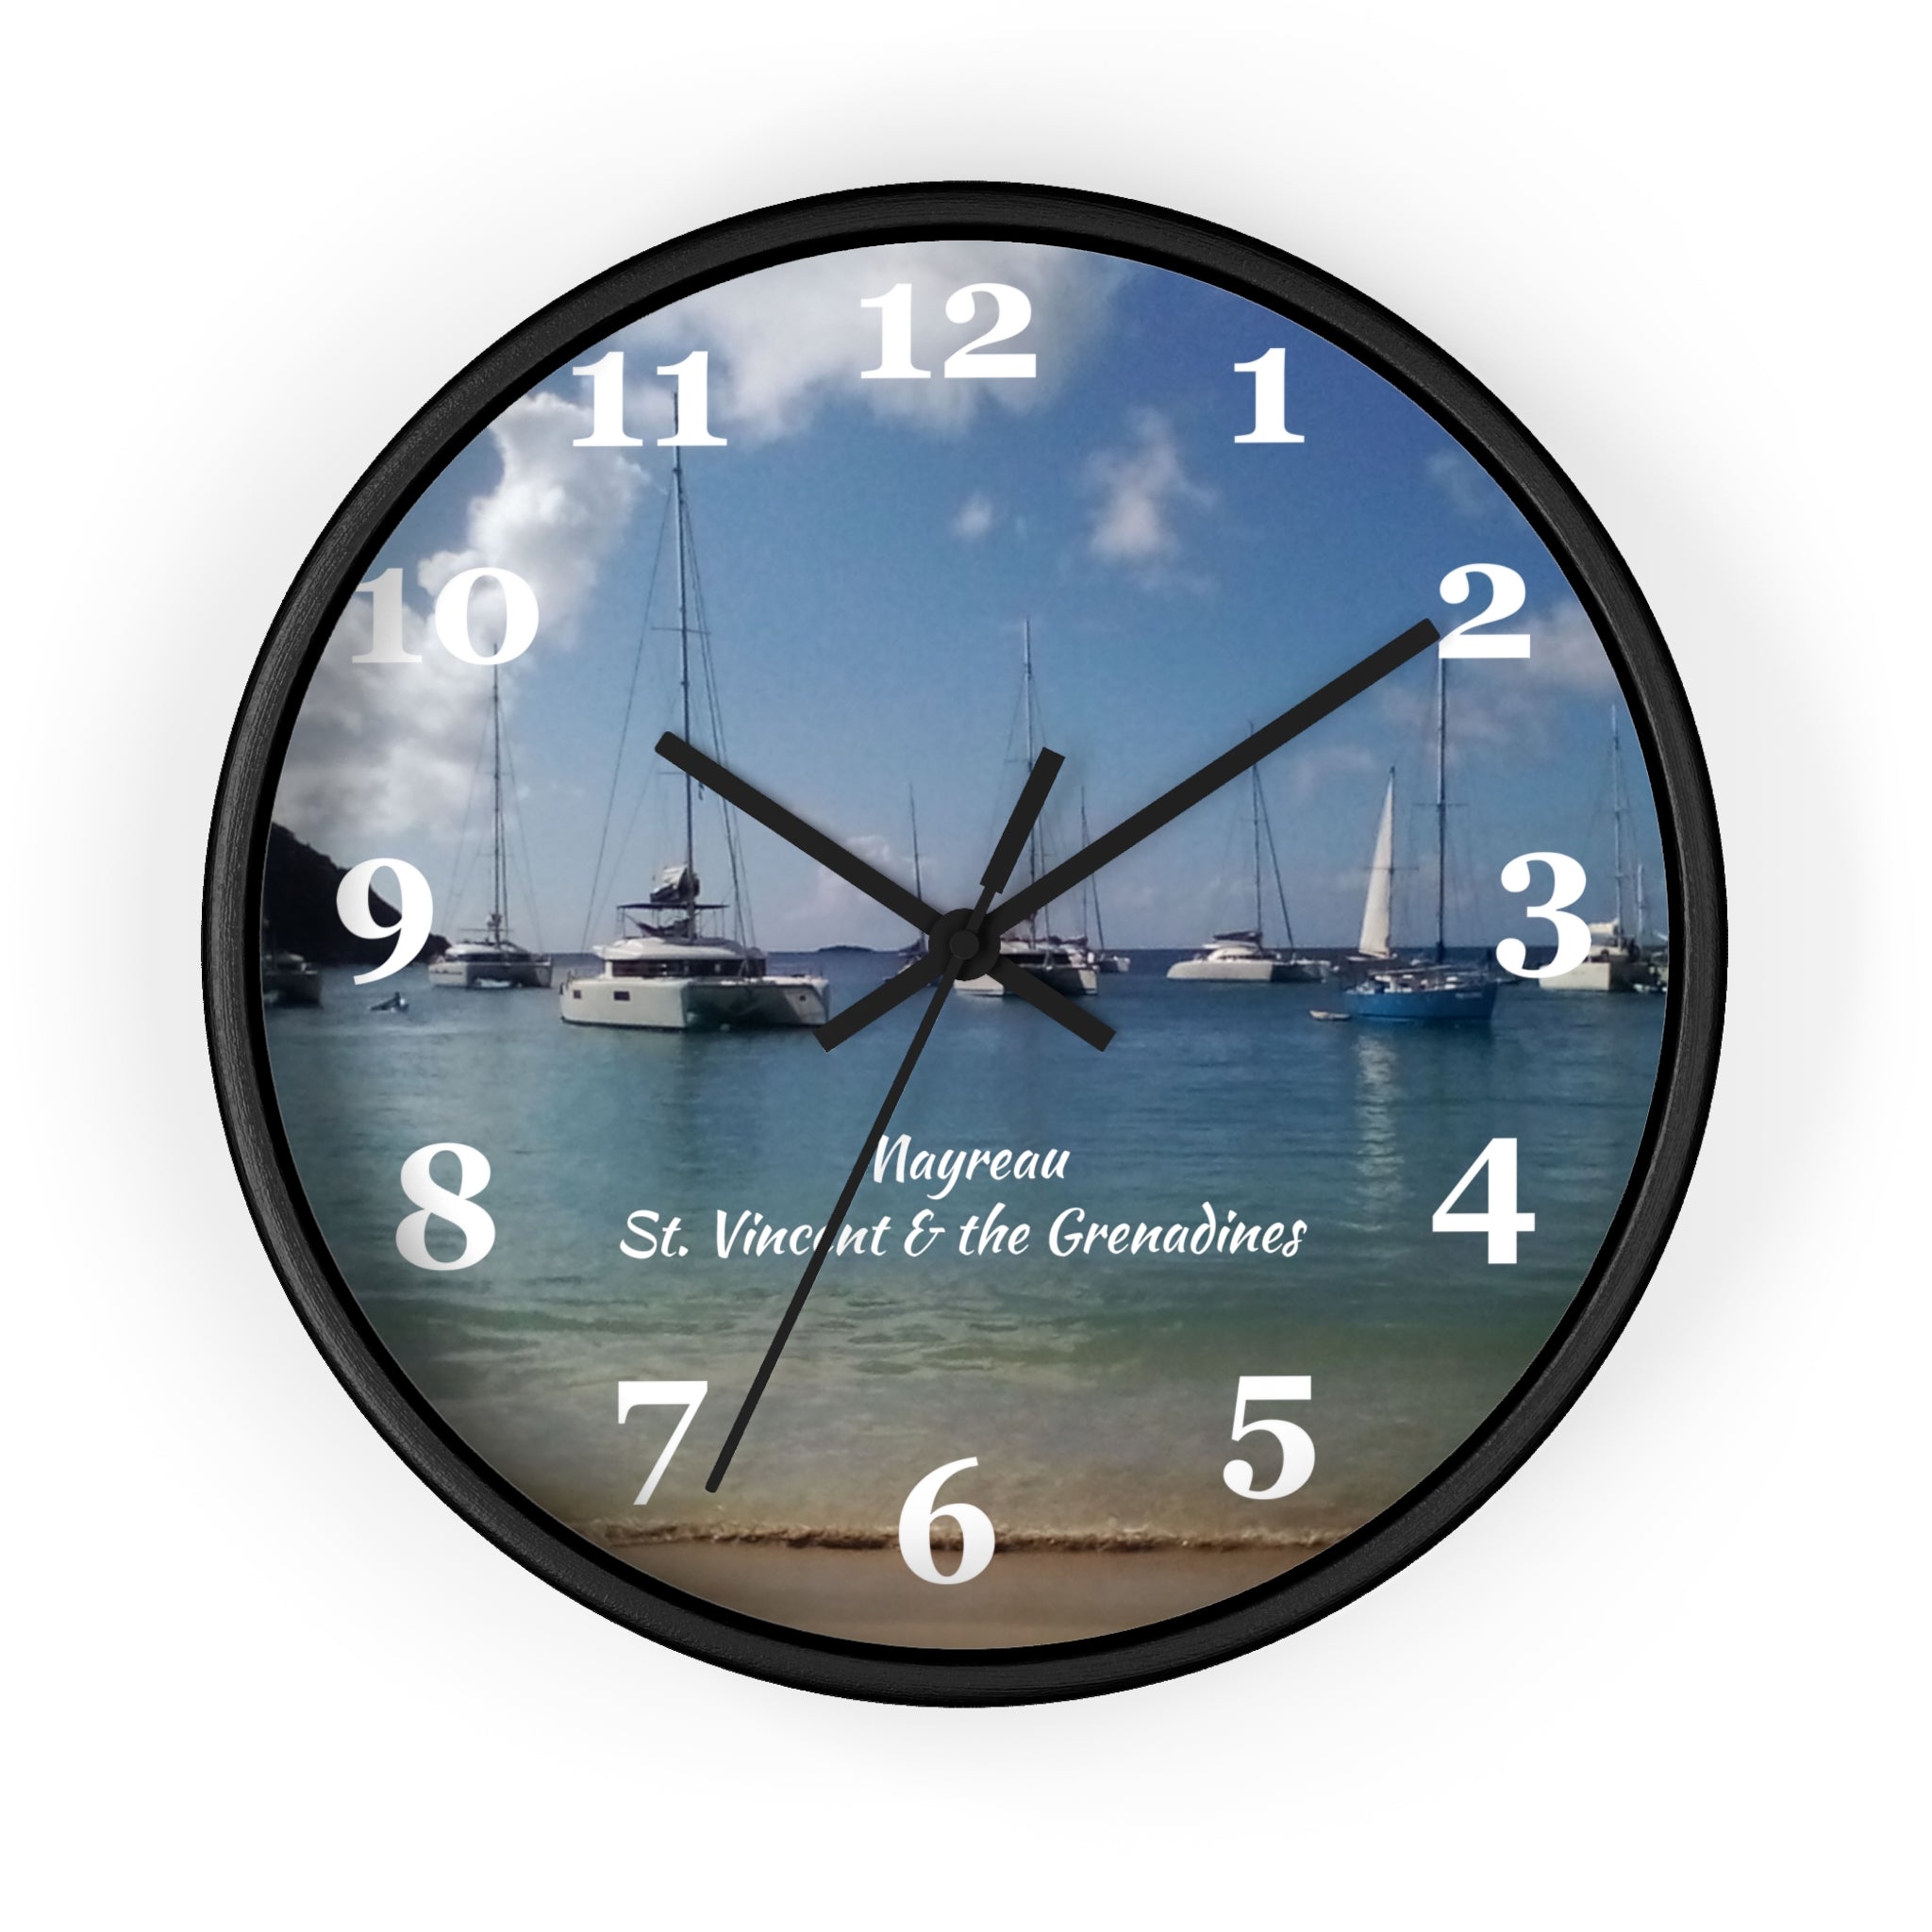 Mayreau Beach Wall Clock, 10 inch round wall clock showing a picture of Mayreau beach in St. Vincent and the Grenadines